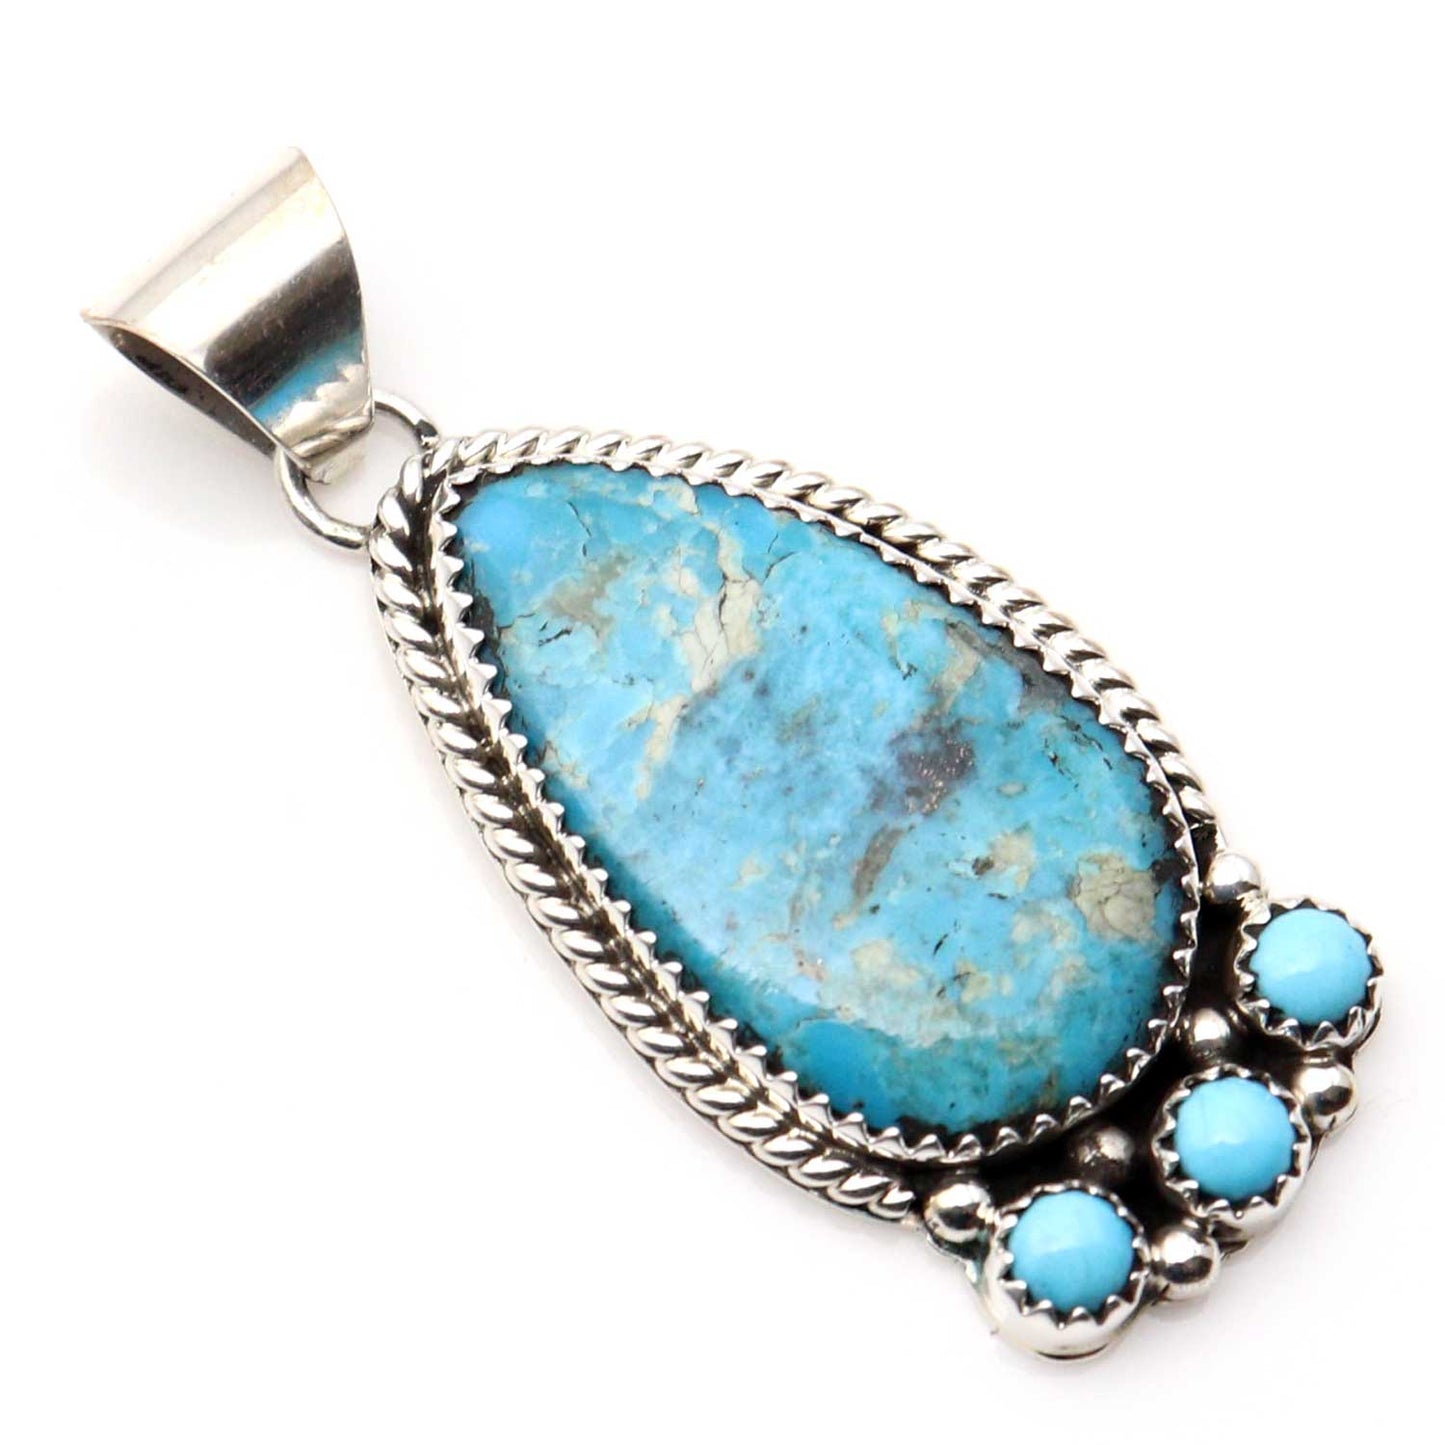 Tear Drop Turquoise Pendant by Yazzie